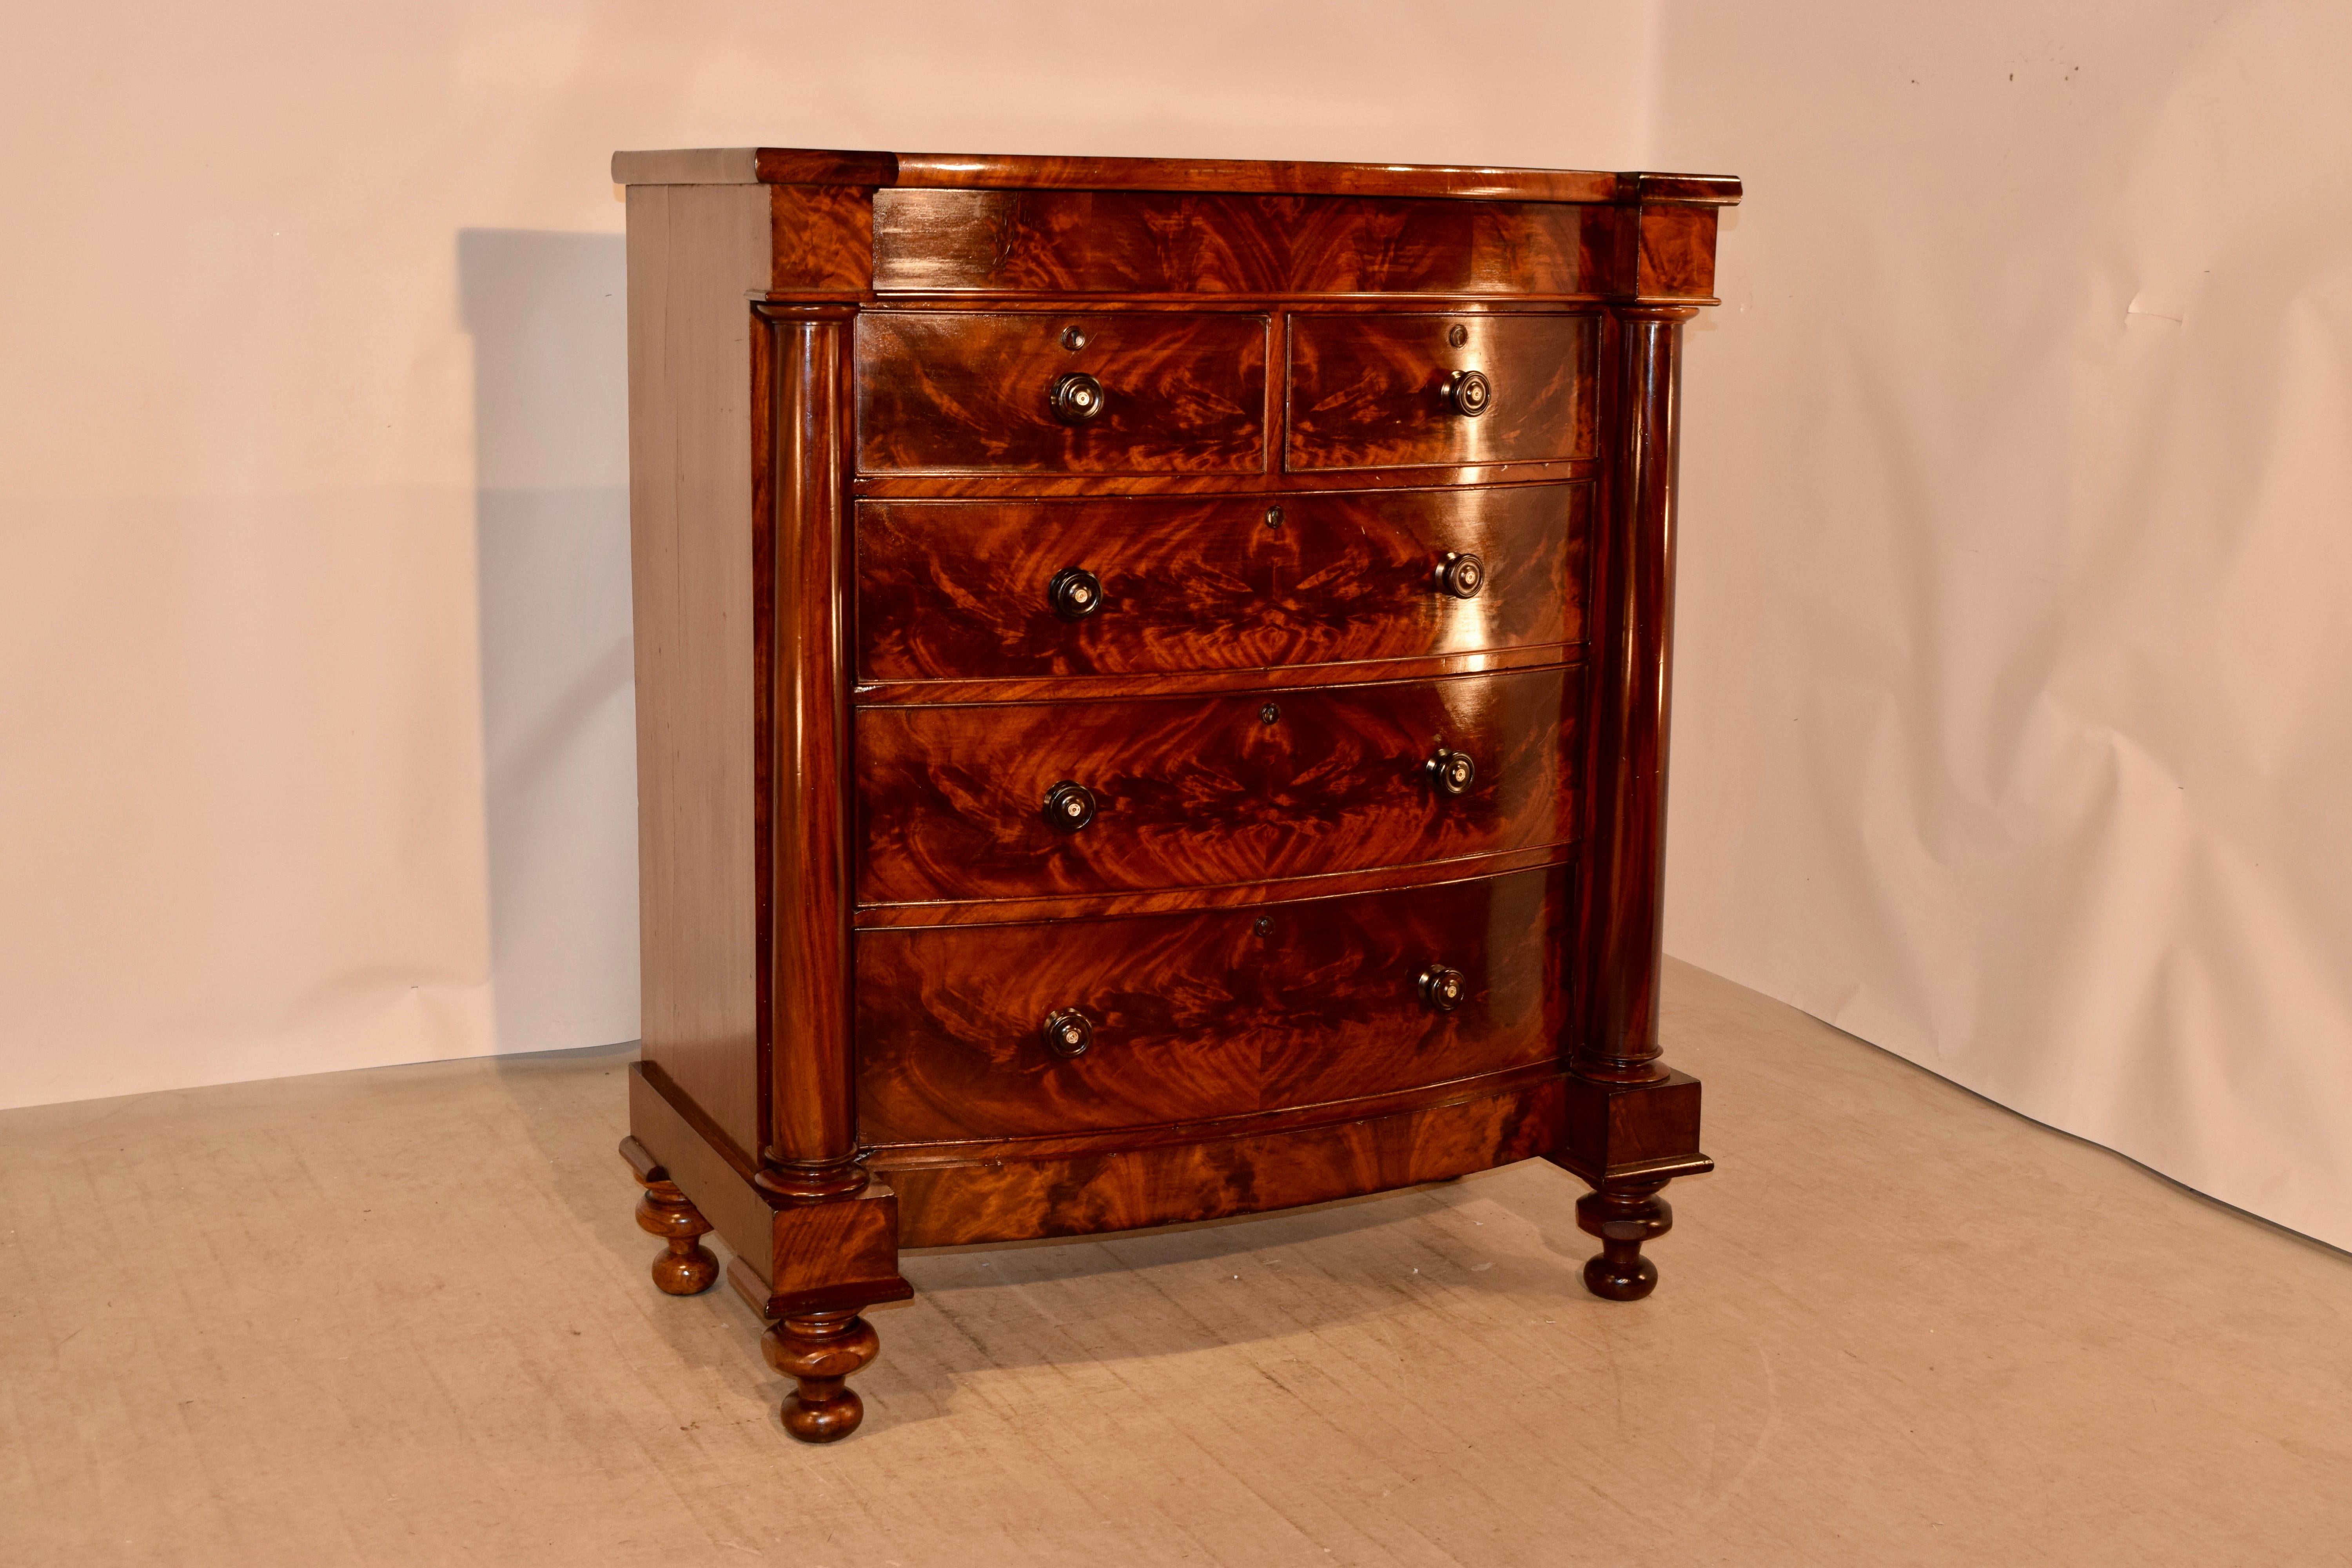 19th century large mahogany bowfront chest of drawers from England with a shaped top, following down to beautifully grained sides and a hidden drawer at the top over two smaller drawers and three larger drawers, which are flanked by blocked columns.